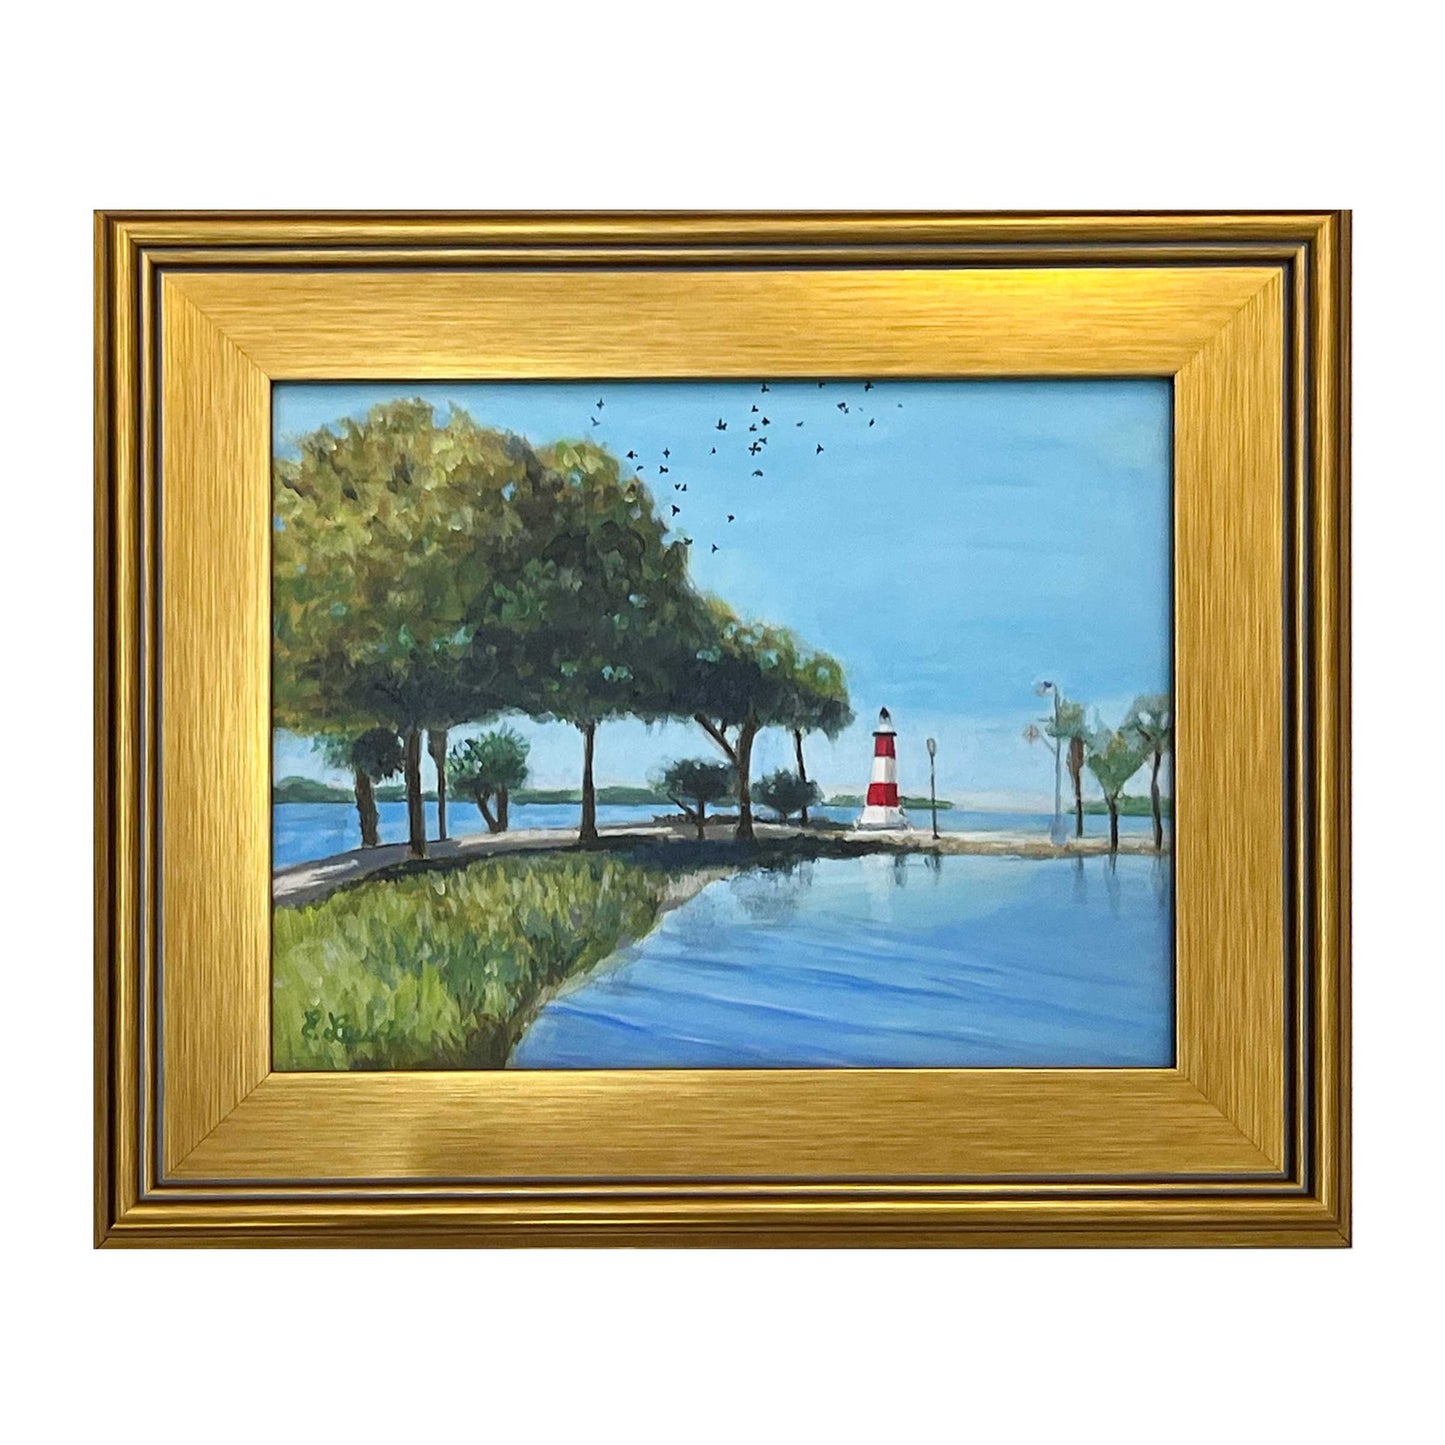 Iconic Mount Dora Lighthouse on Grantham Point by Emily Lewis, Original Acrylic painting, framed in a gold Plein Air Frame, Blue water and blue sky, 11" x 14"